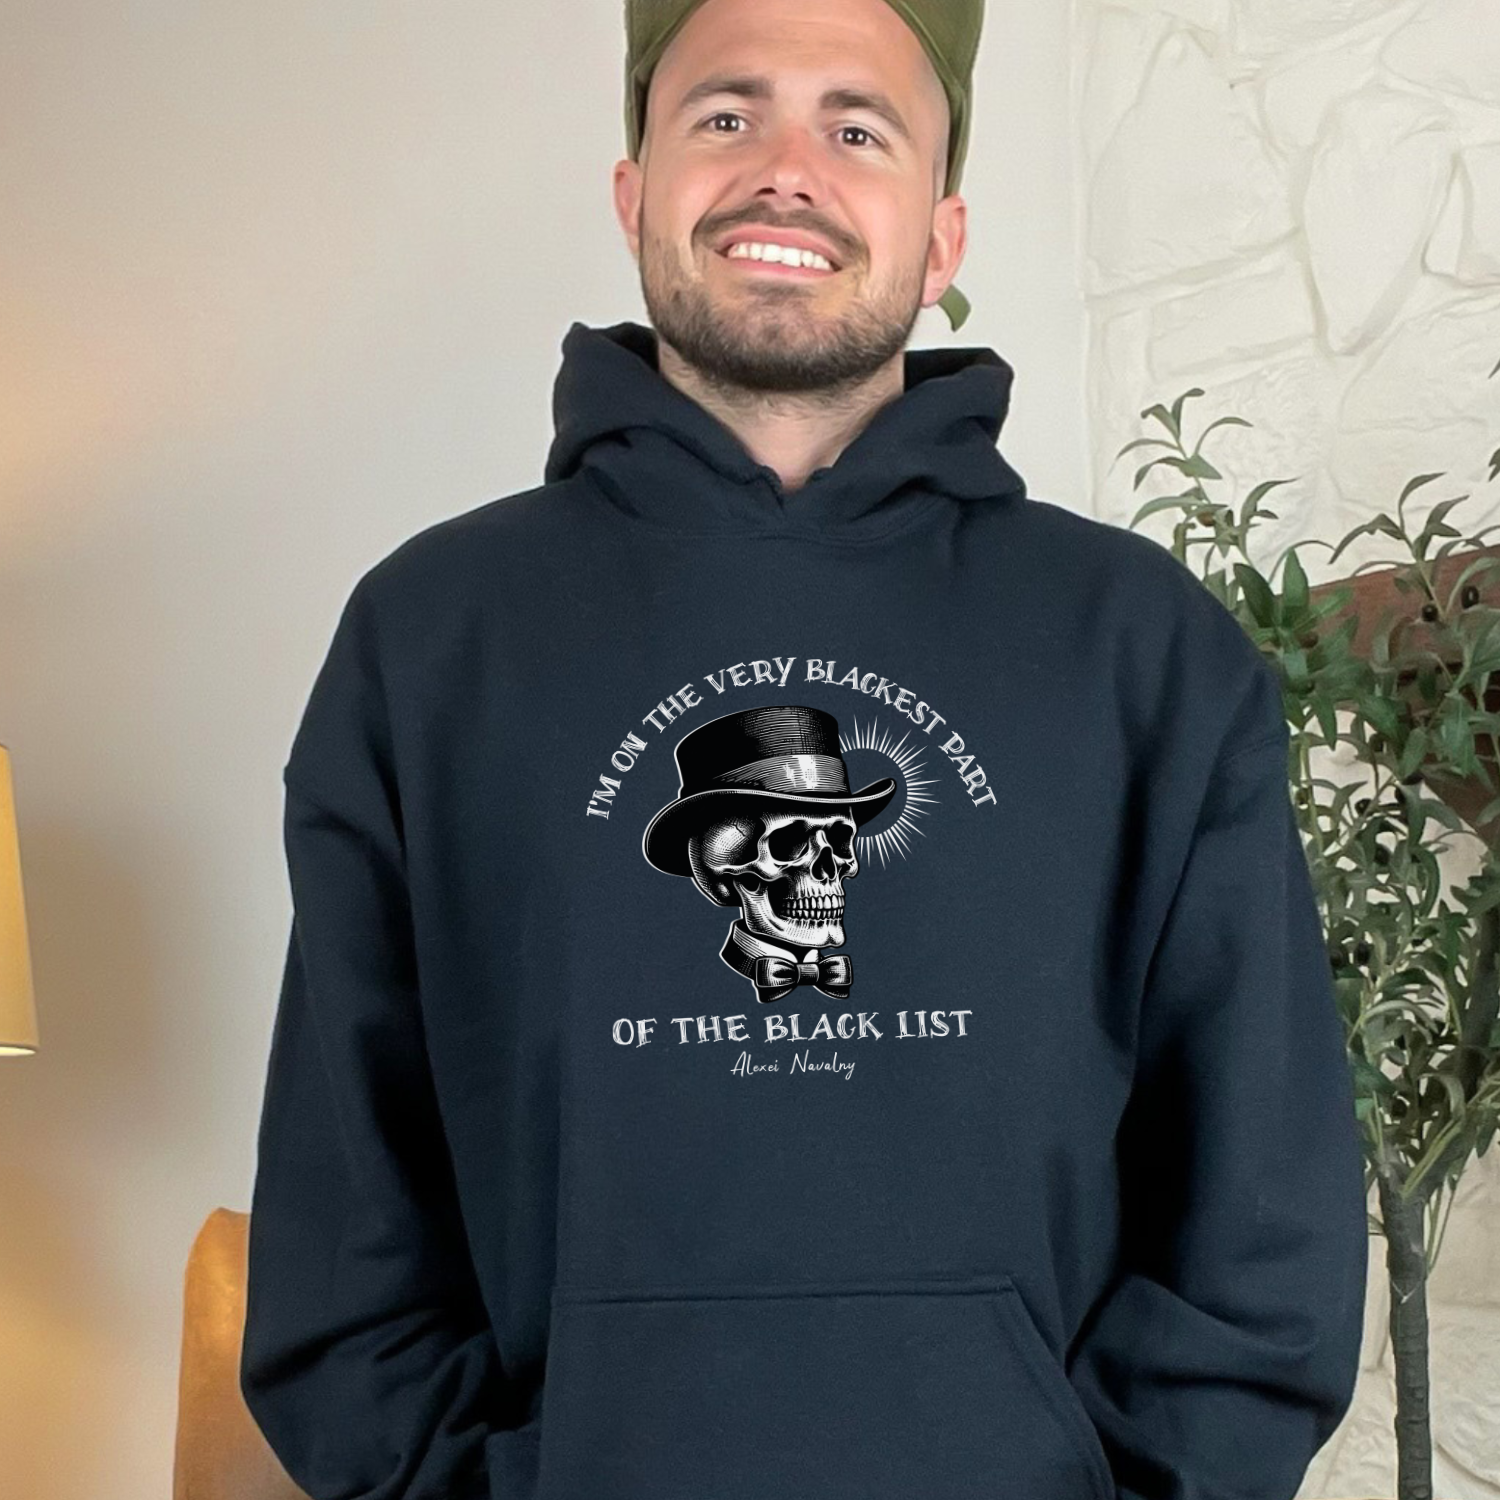 Black hoodie with Alexei Navalny's powerful quote, 'I'm on the very blackest part of the black list,' that stands as a symbol of resistance and courage. Gildan 18500 hooded sweatshirt.